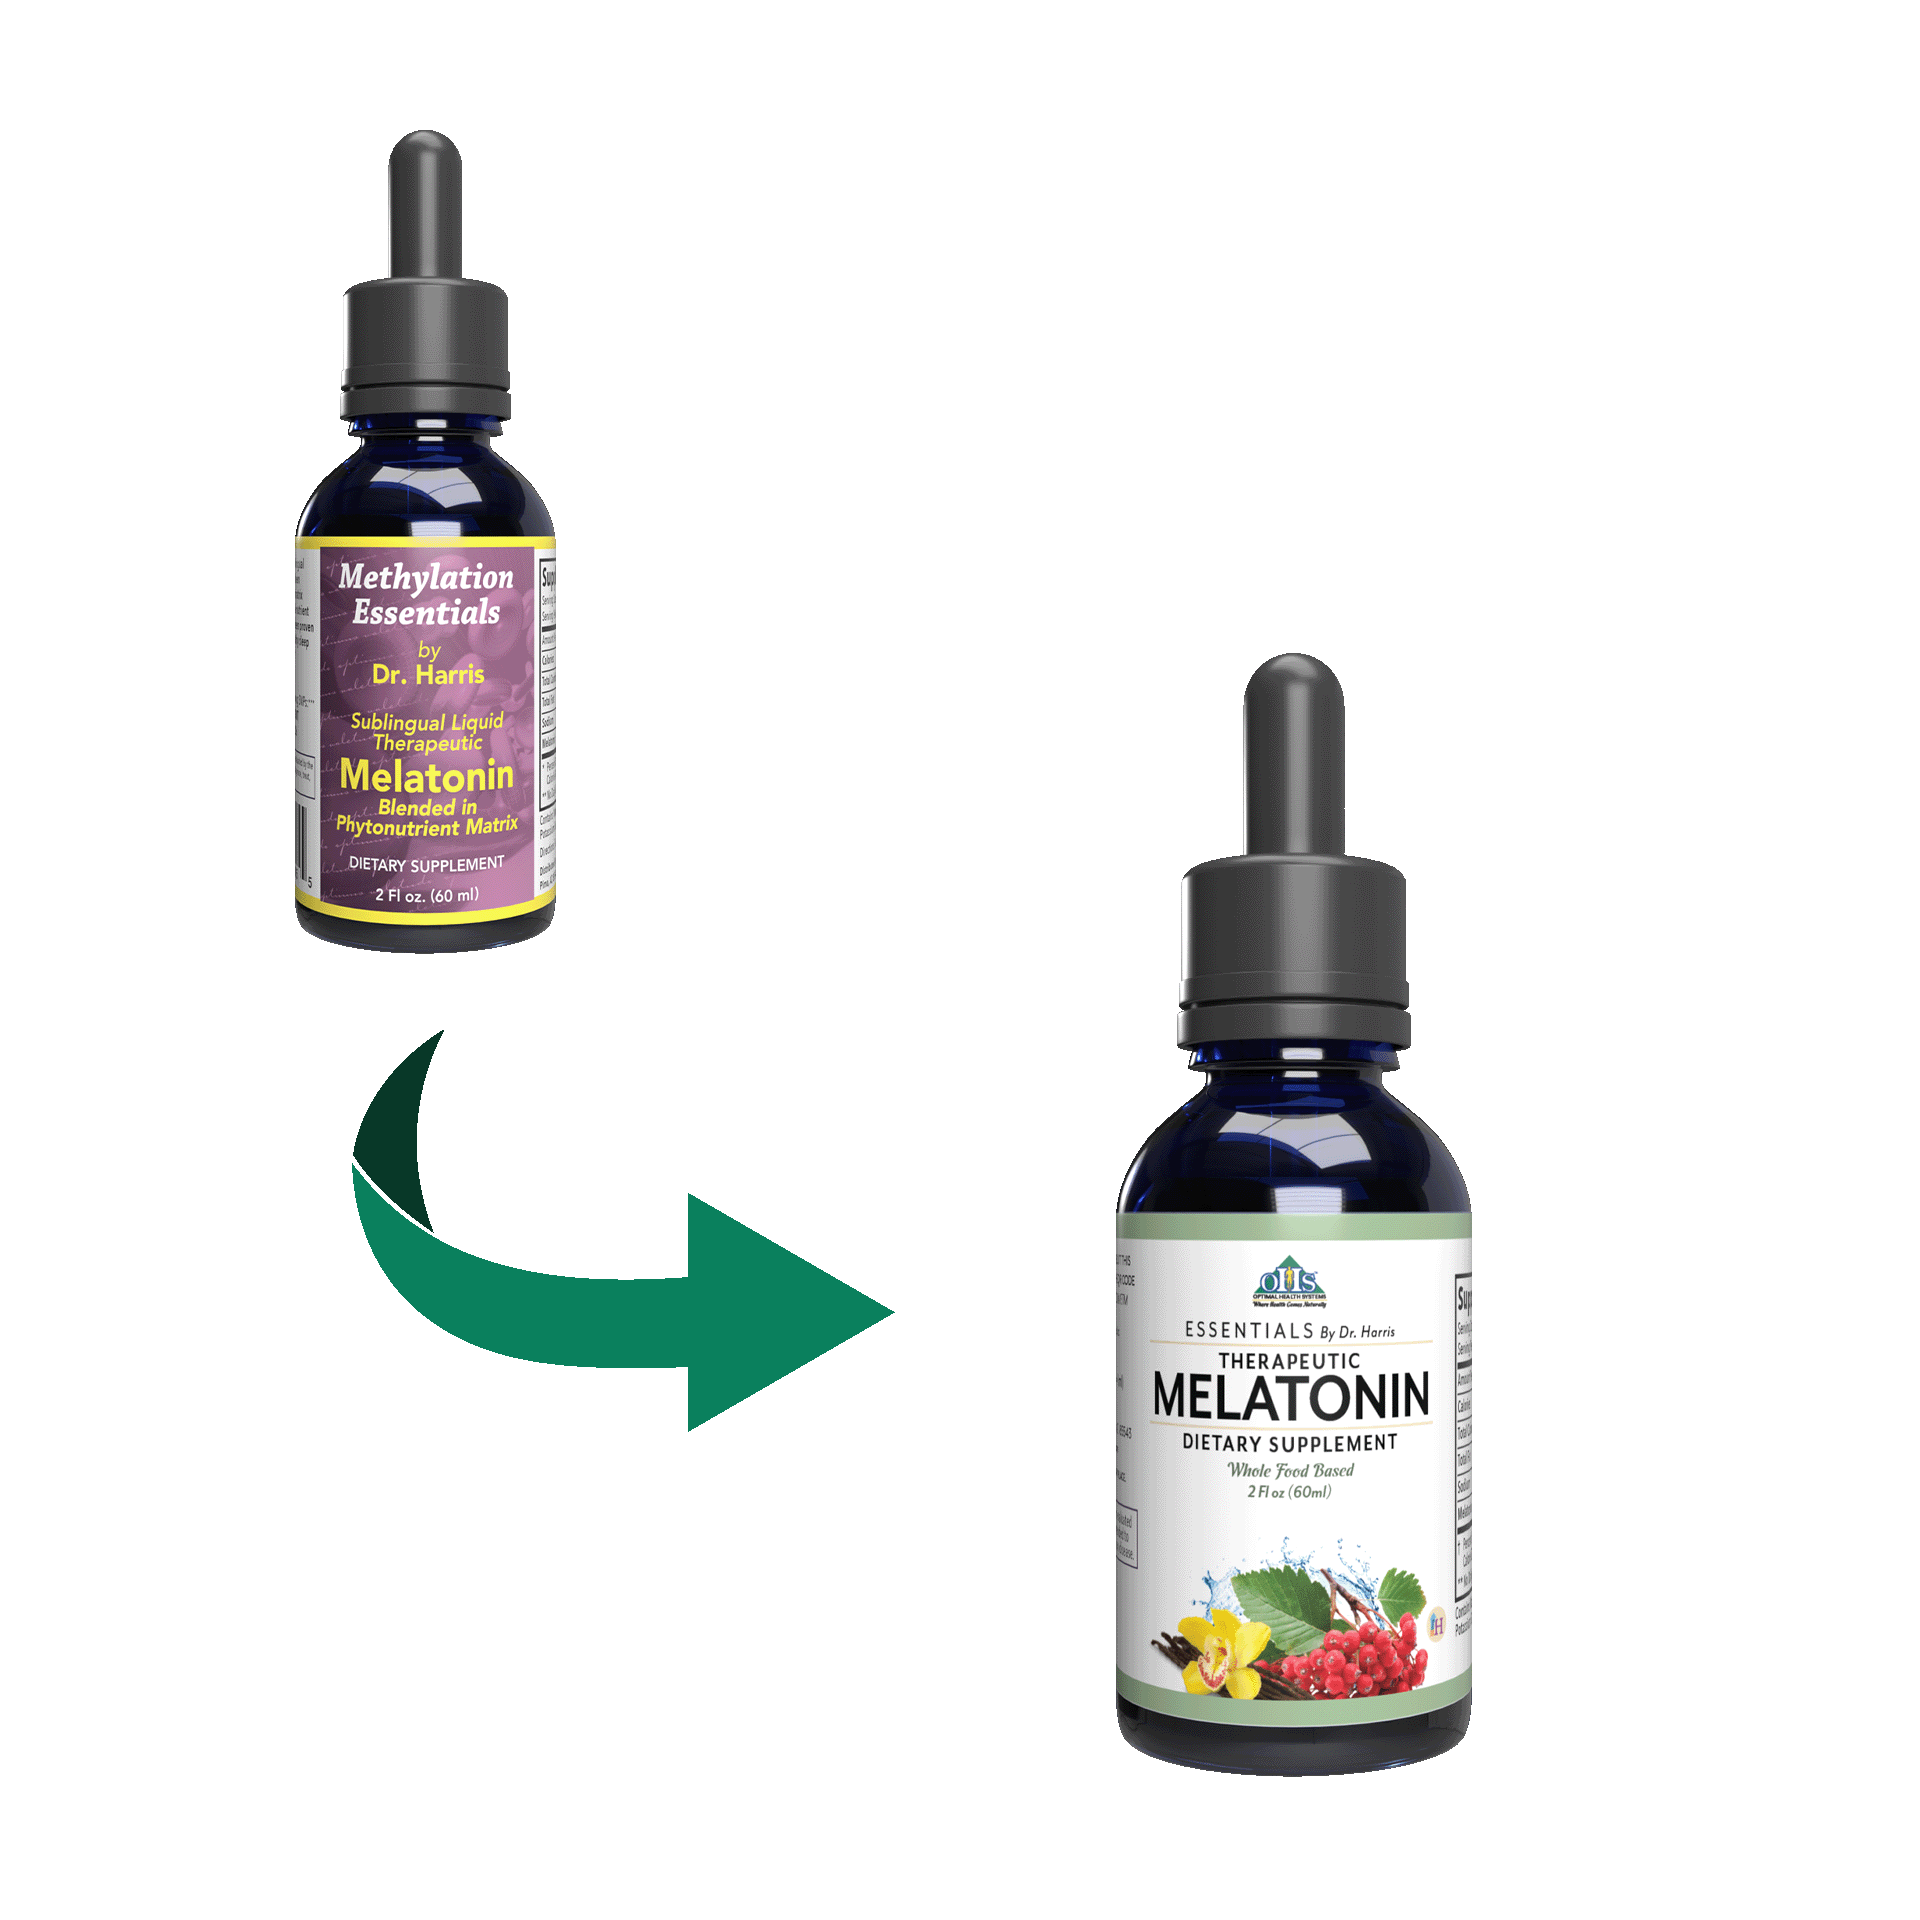 Image of a dropper bottle of Essential Therapeutic melatonin. Next to it is a green arrow pointing to the new design.